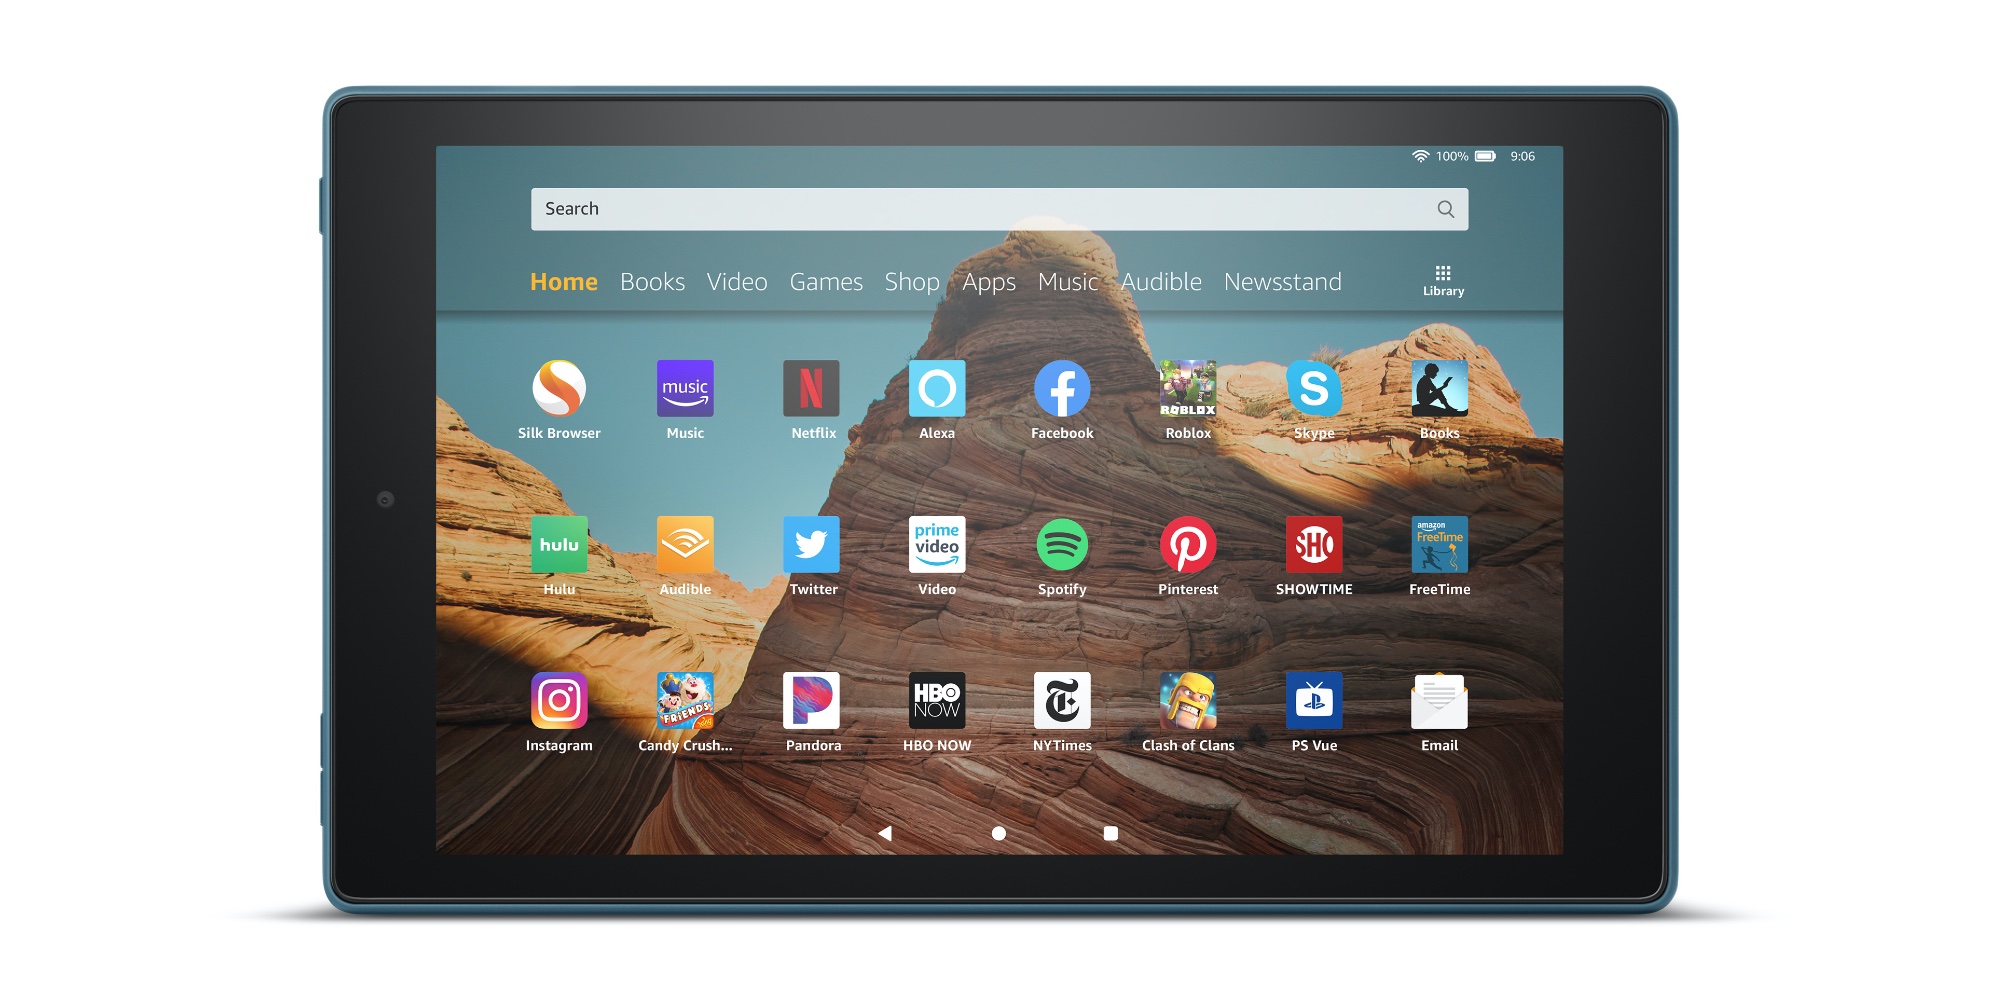 Fire Hd 10 Tablets And Accessories Start At 10 Today Only 9to5toys